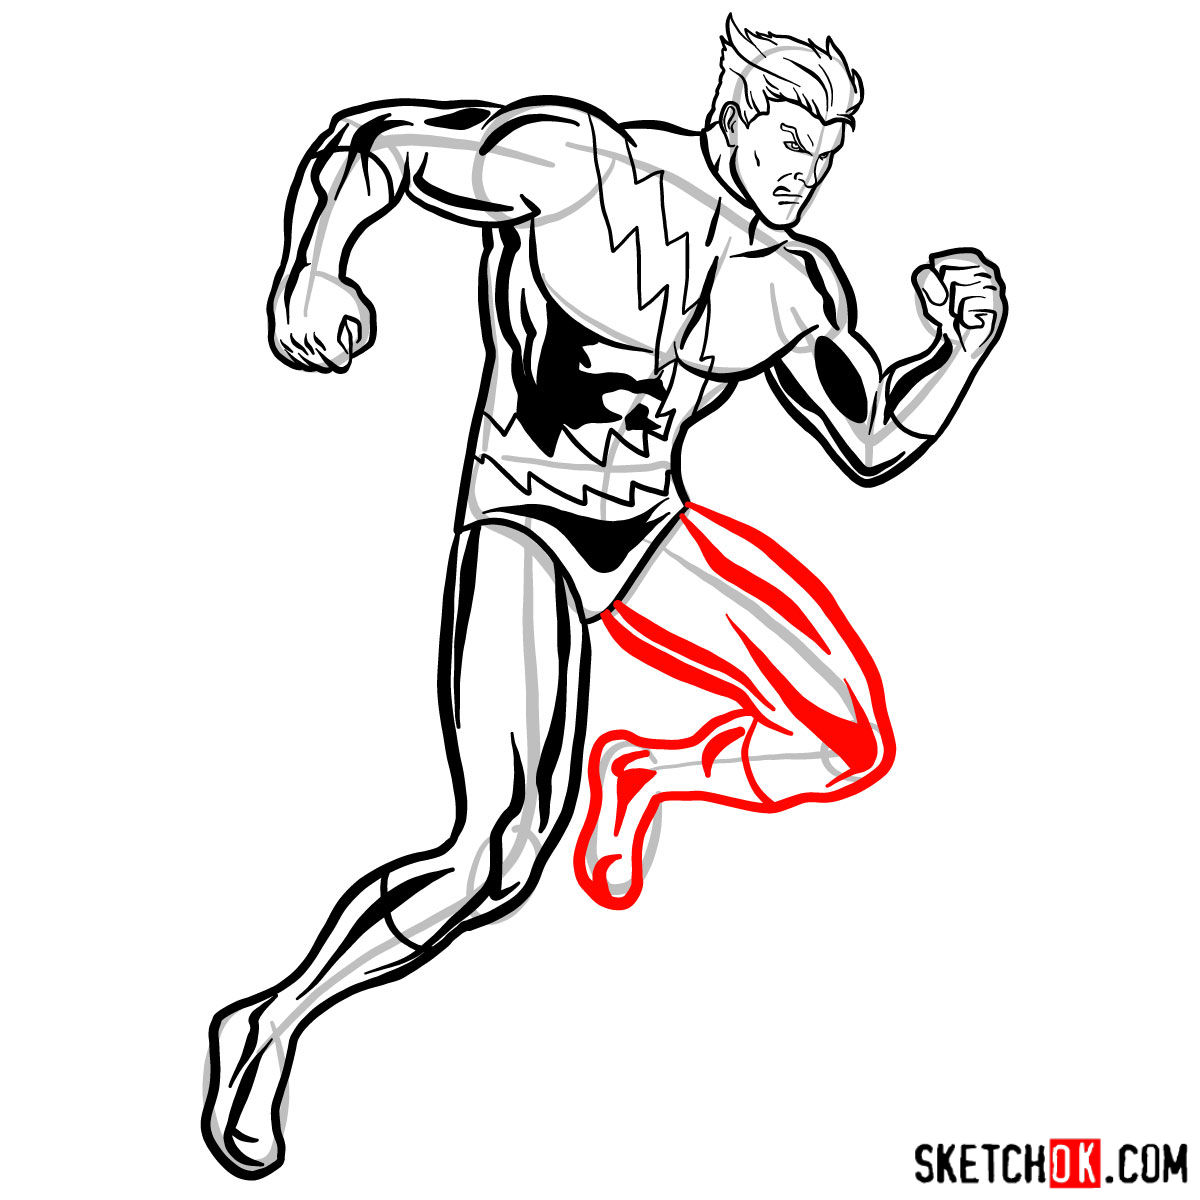 How to draw Quicksilver from Marvel Comics - step 12